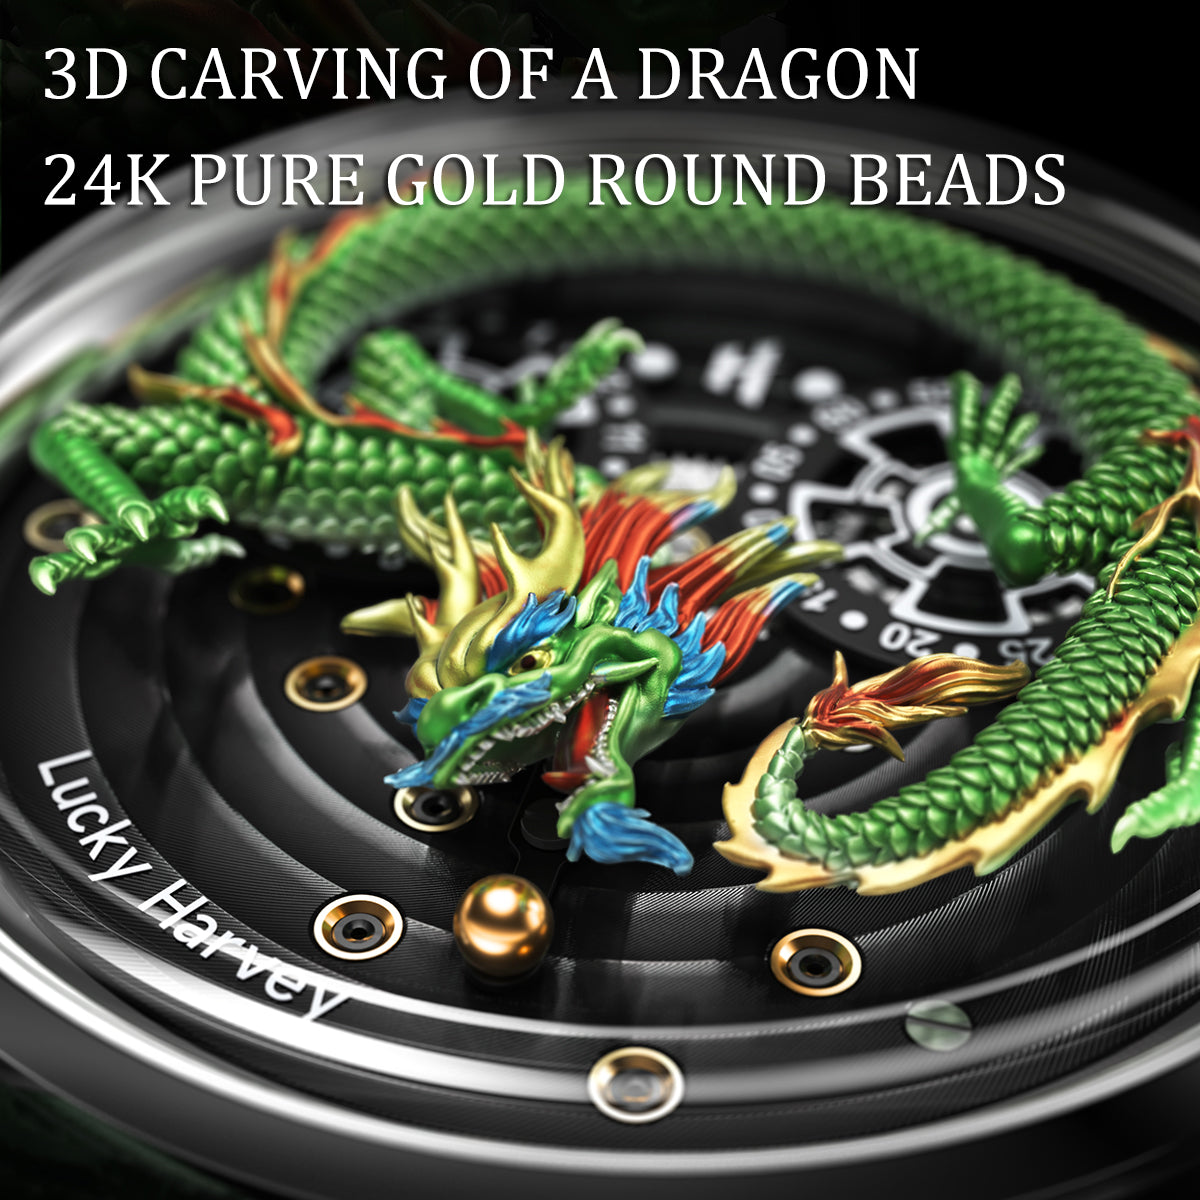 Jaquet Droz THE ROLLING STONES AUTOMATON | Watches News